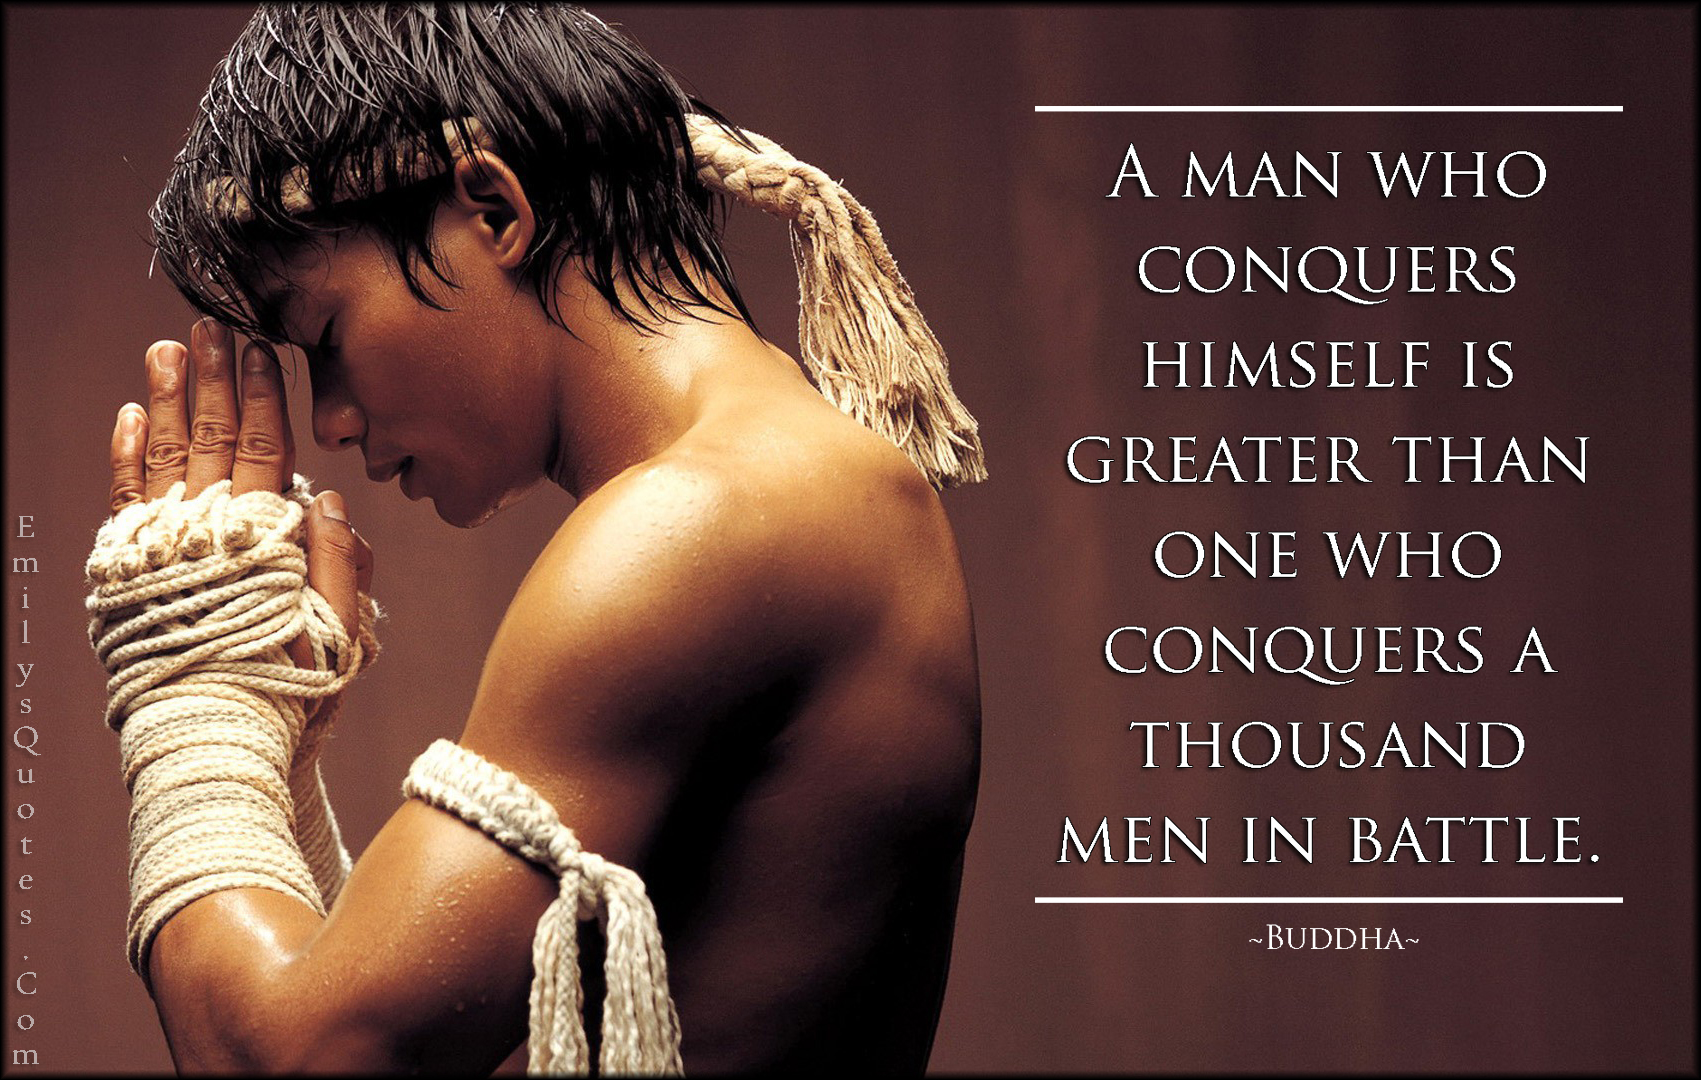 A man who conquers himself is greater than one who conquers a thousand men in battle